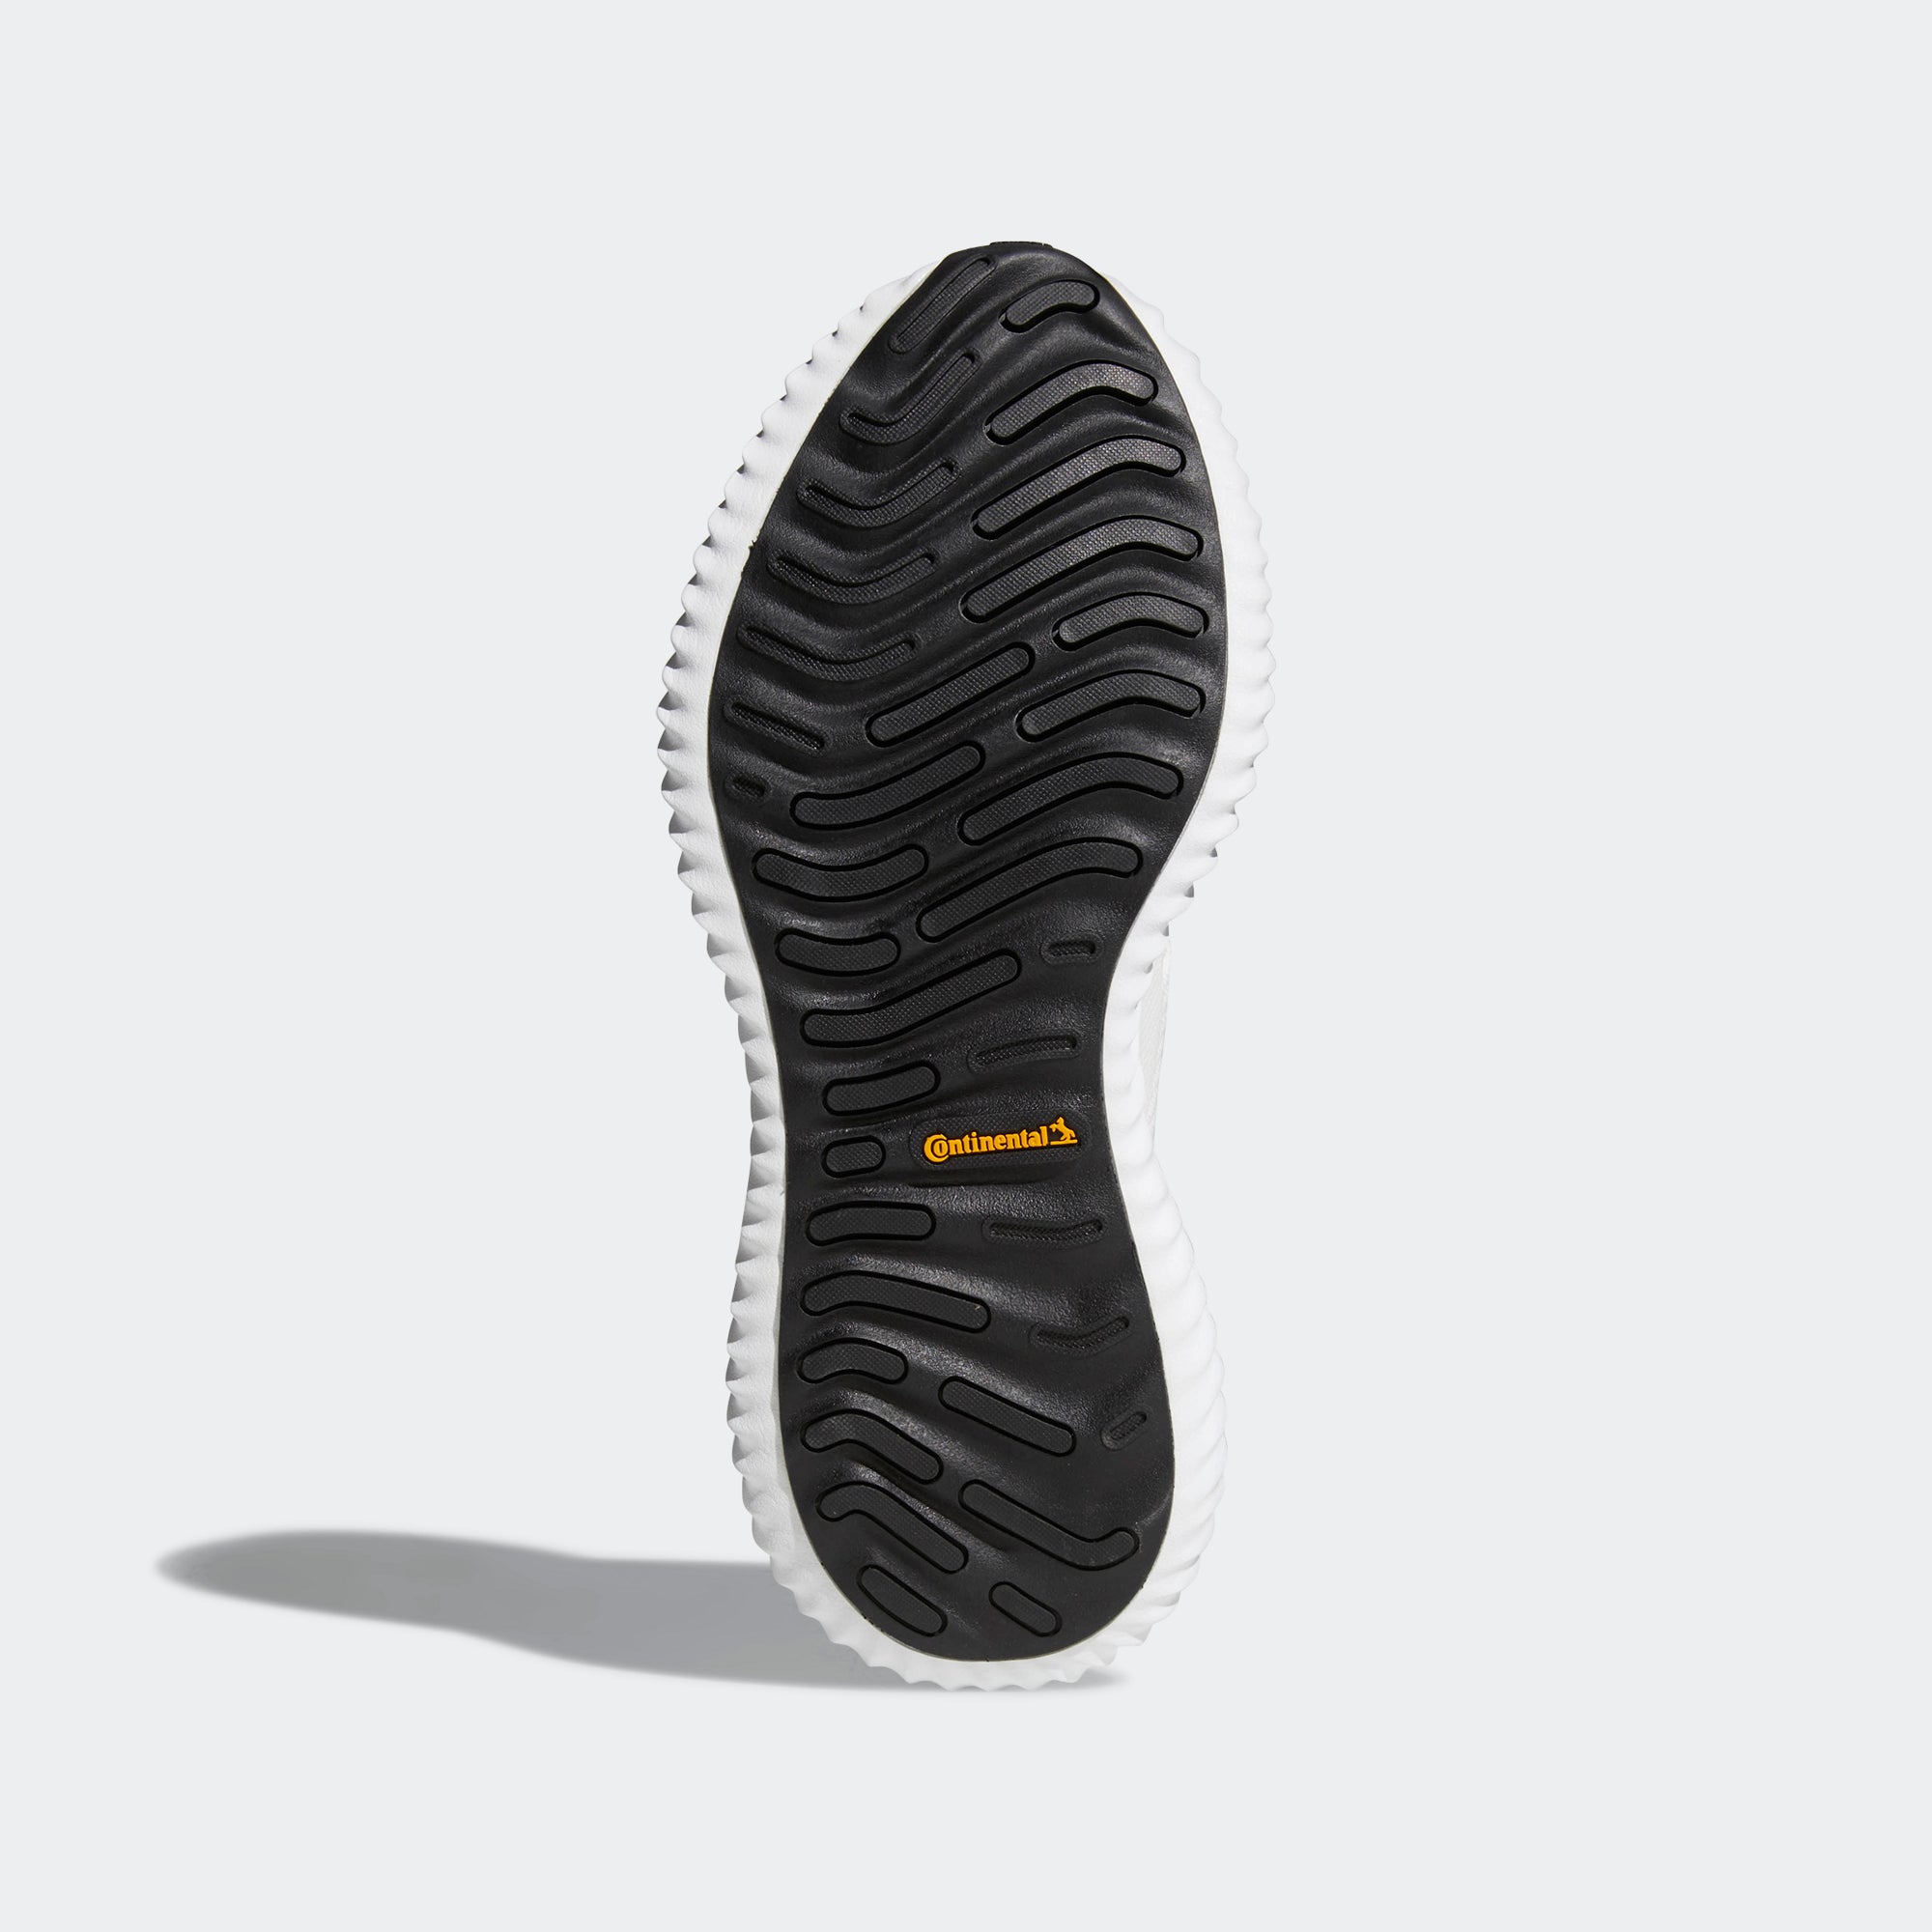 continental alphabounce shoes